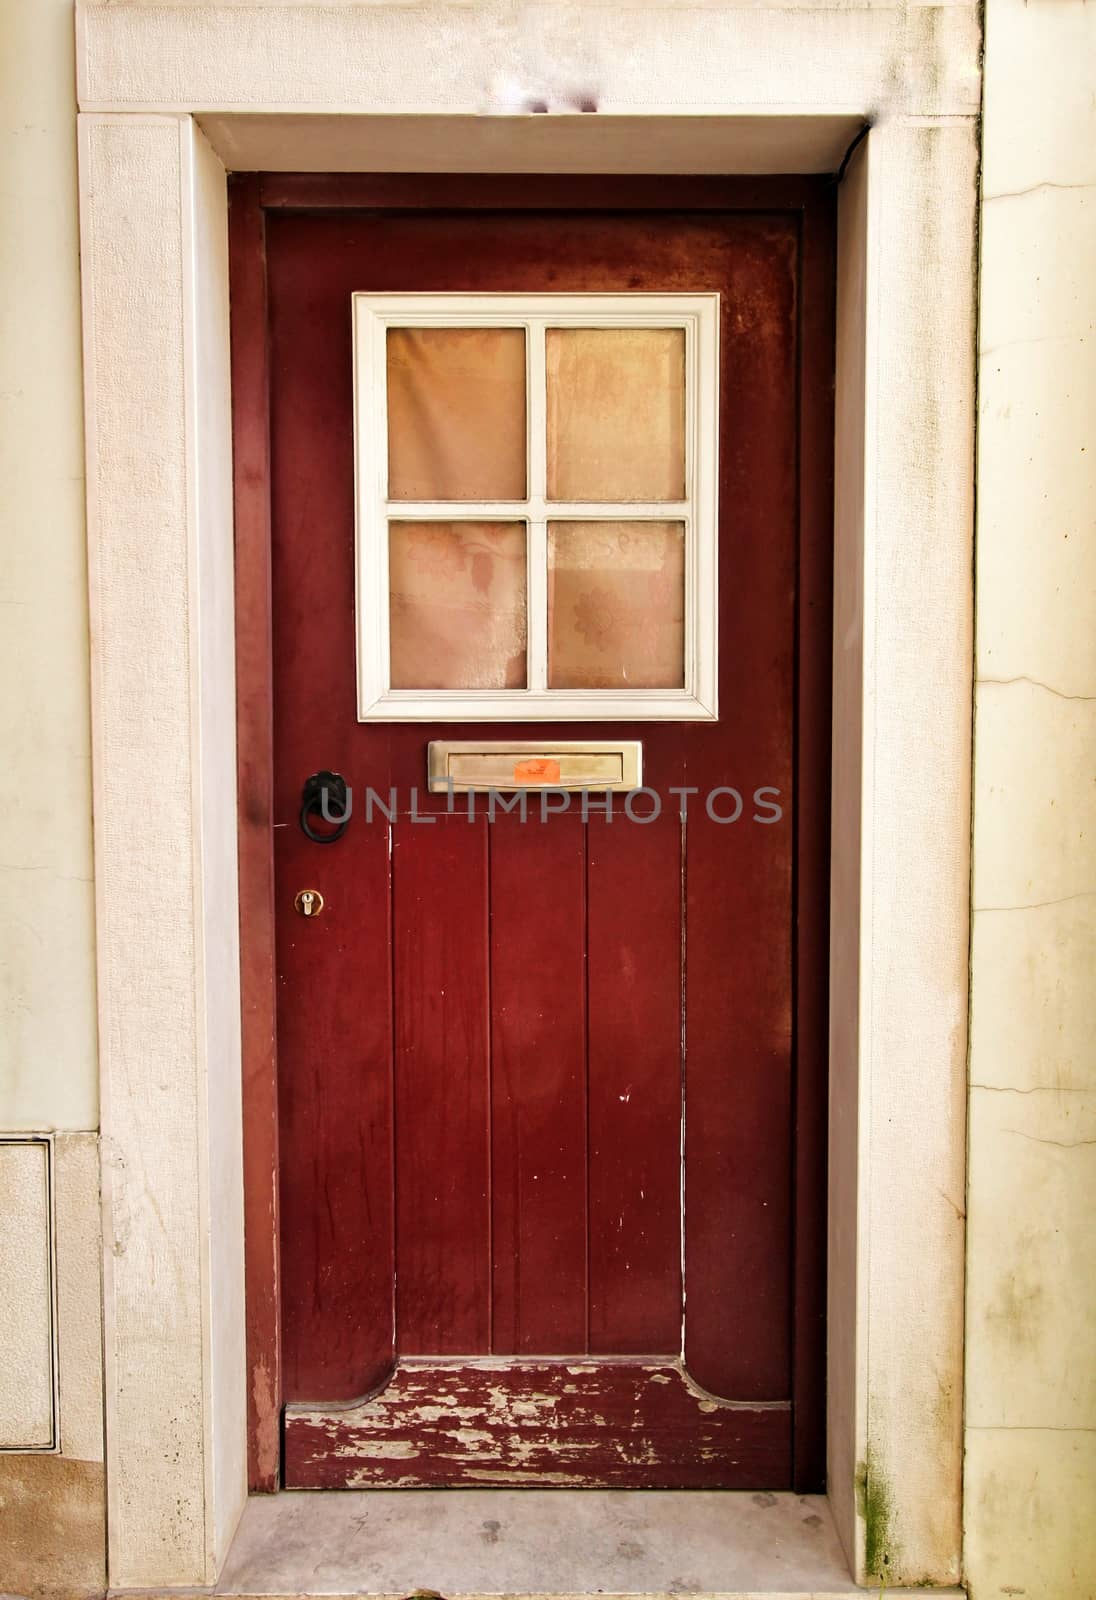 Old and colorful wooden door with iron details by soniabonet